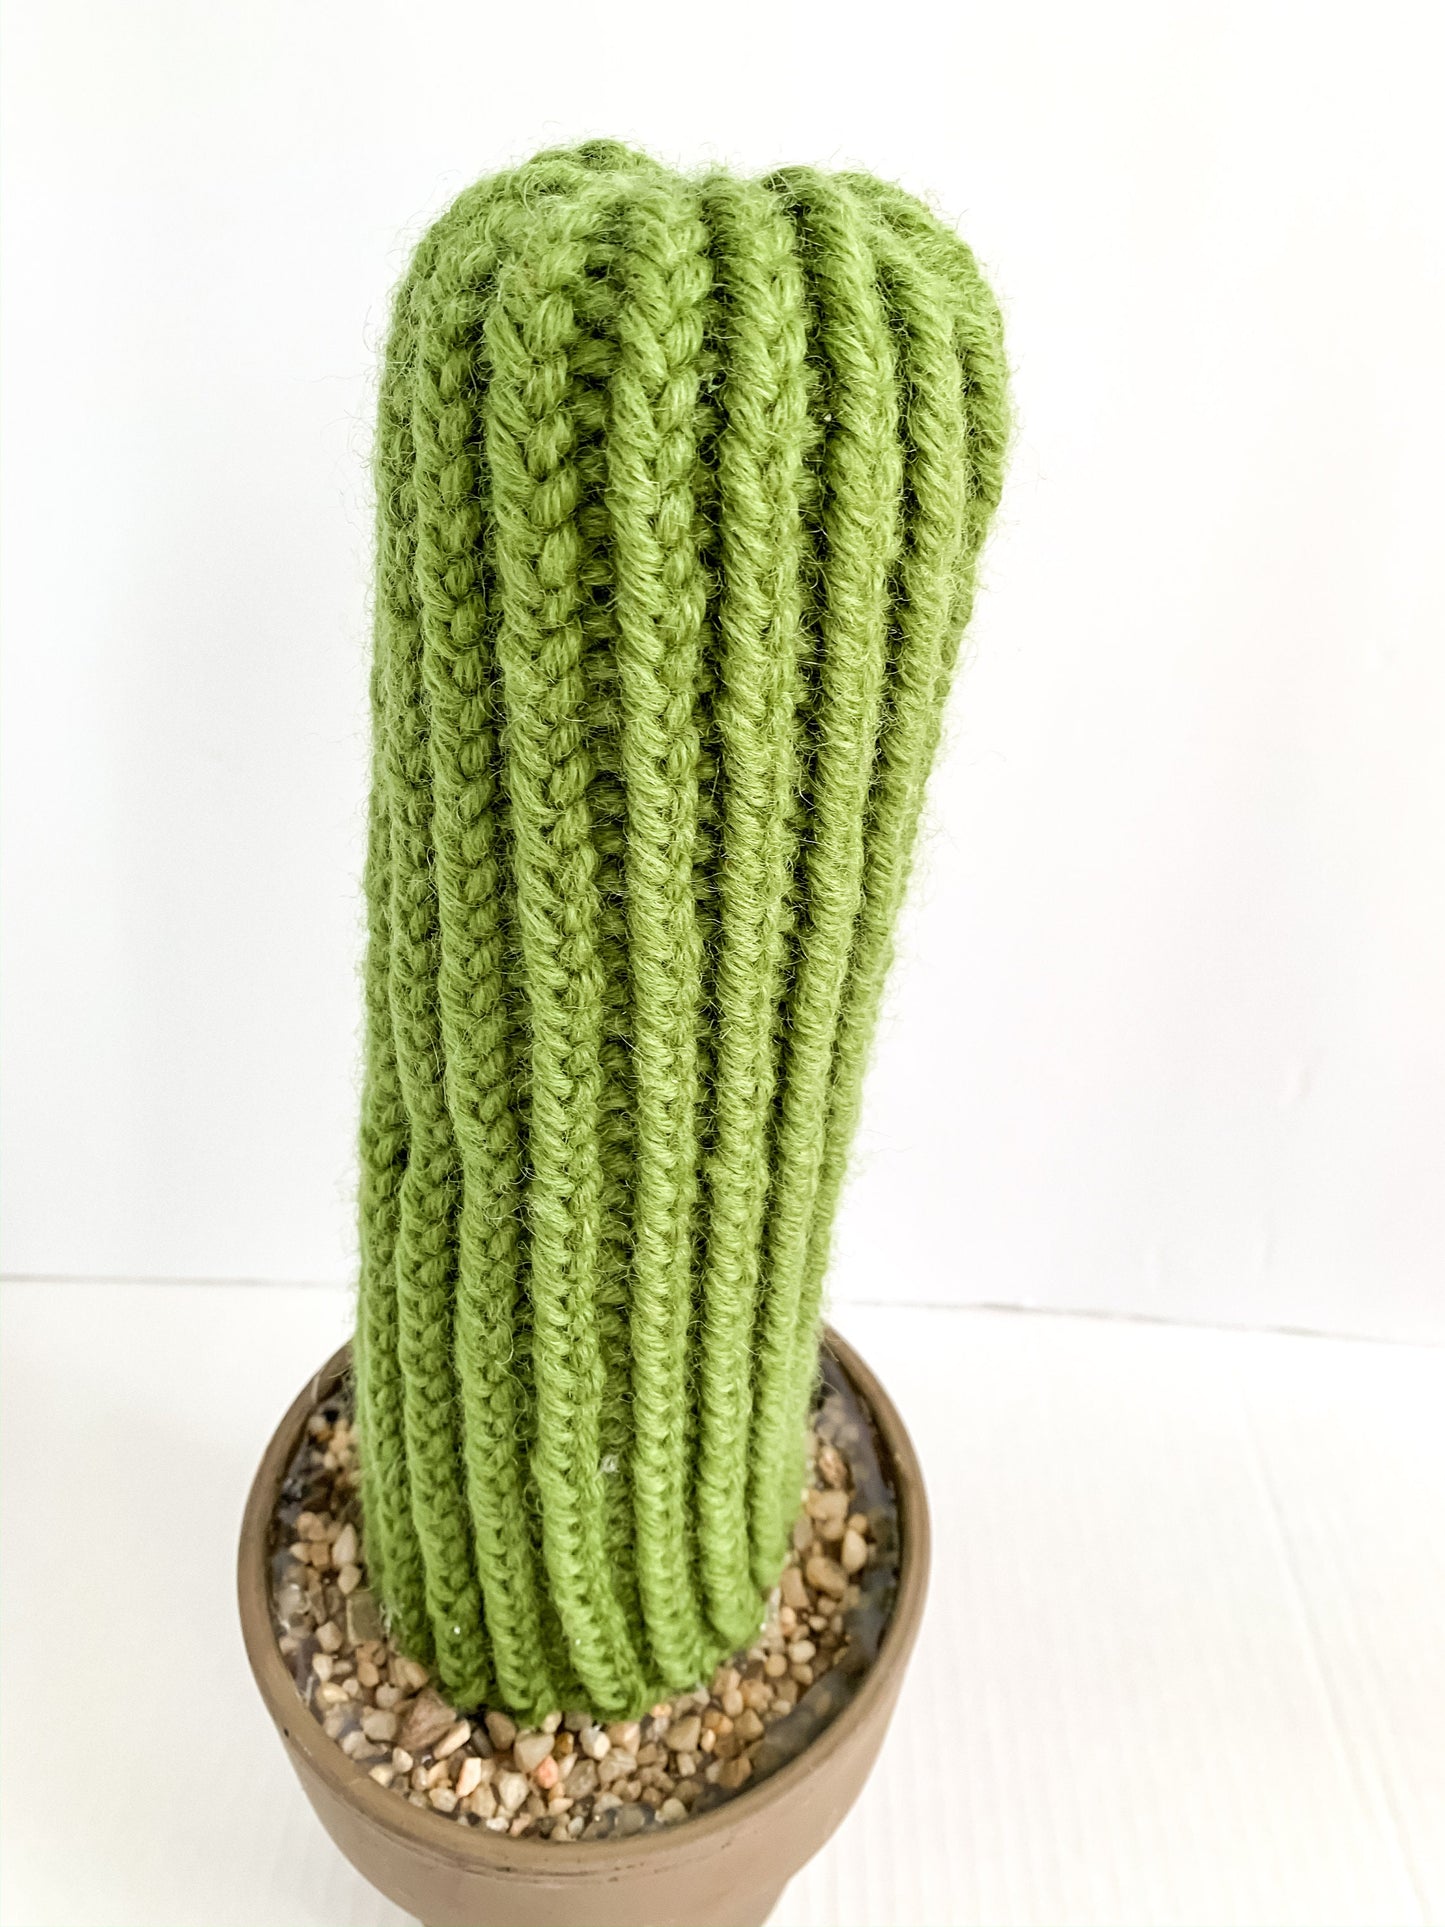 Knit Cactus // Pencil Cactus, Knit Cactus Planted in Up-cycled Brown Pot // Boho Home Decor // Home Office Decor // Desk Accessory